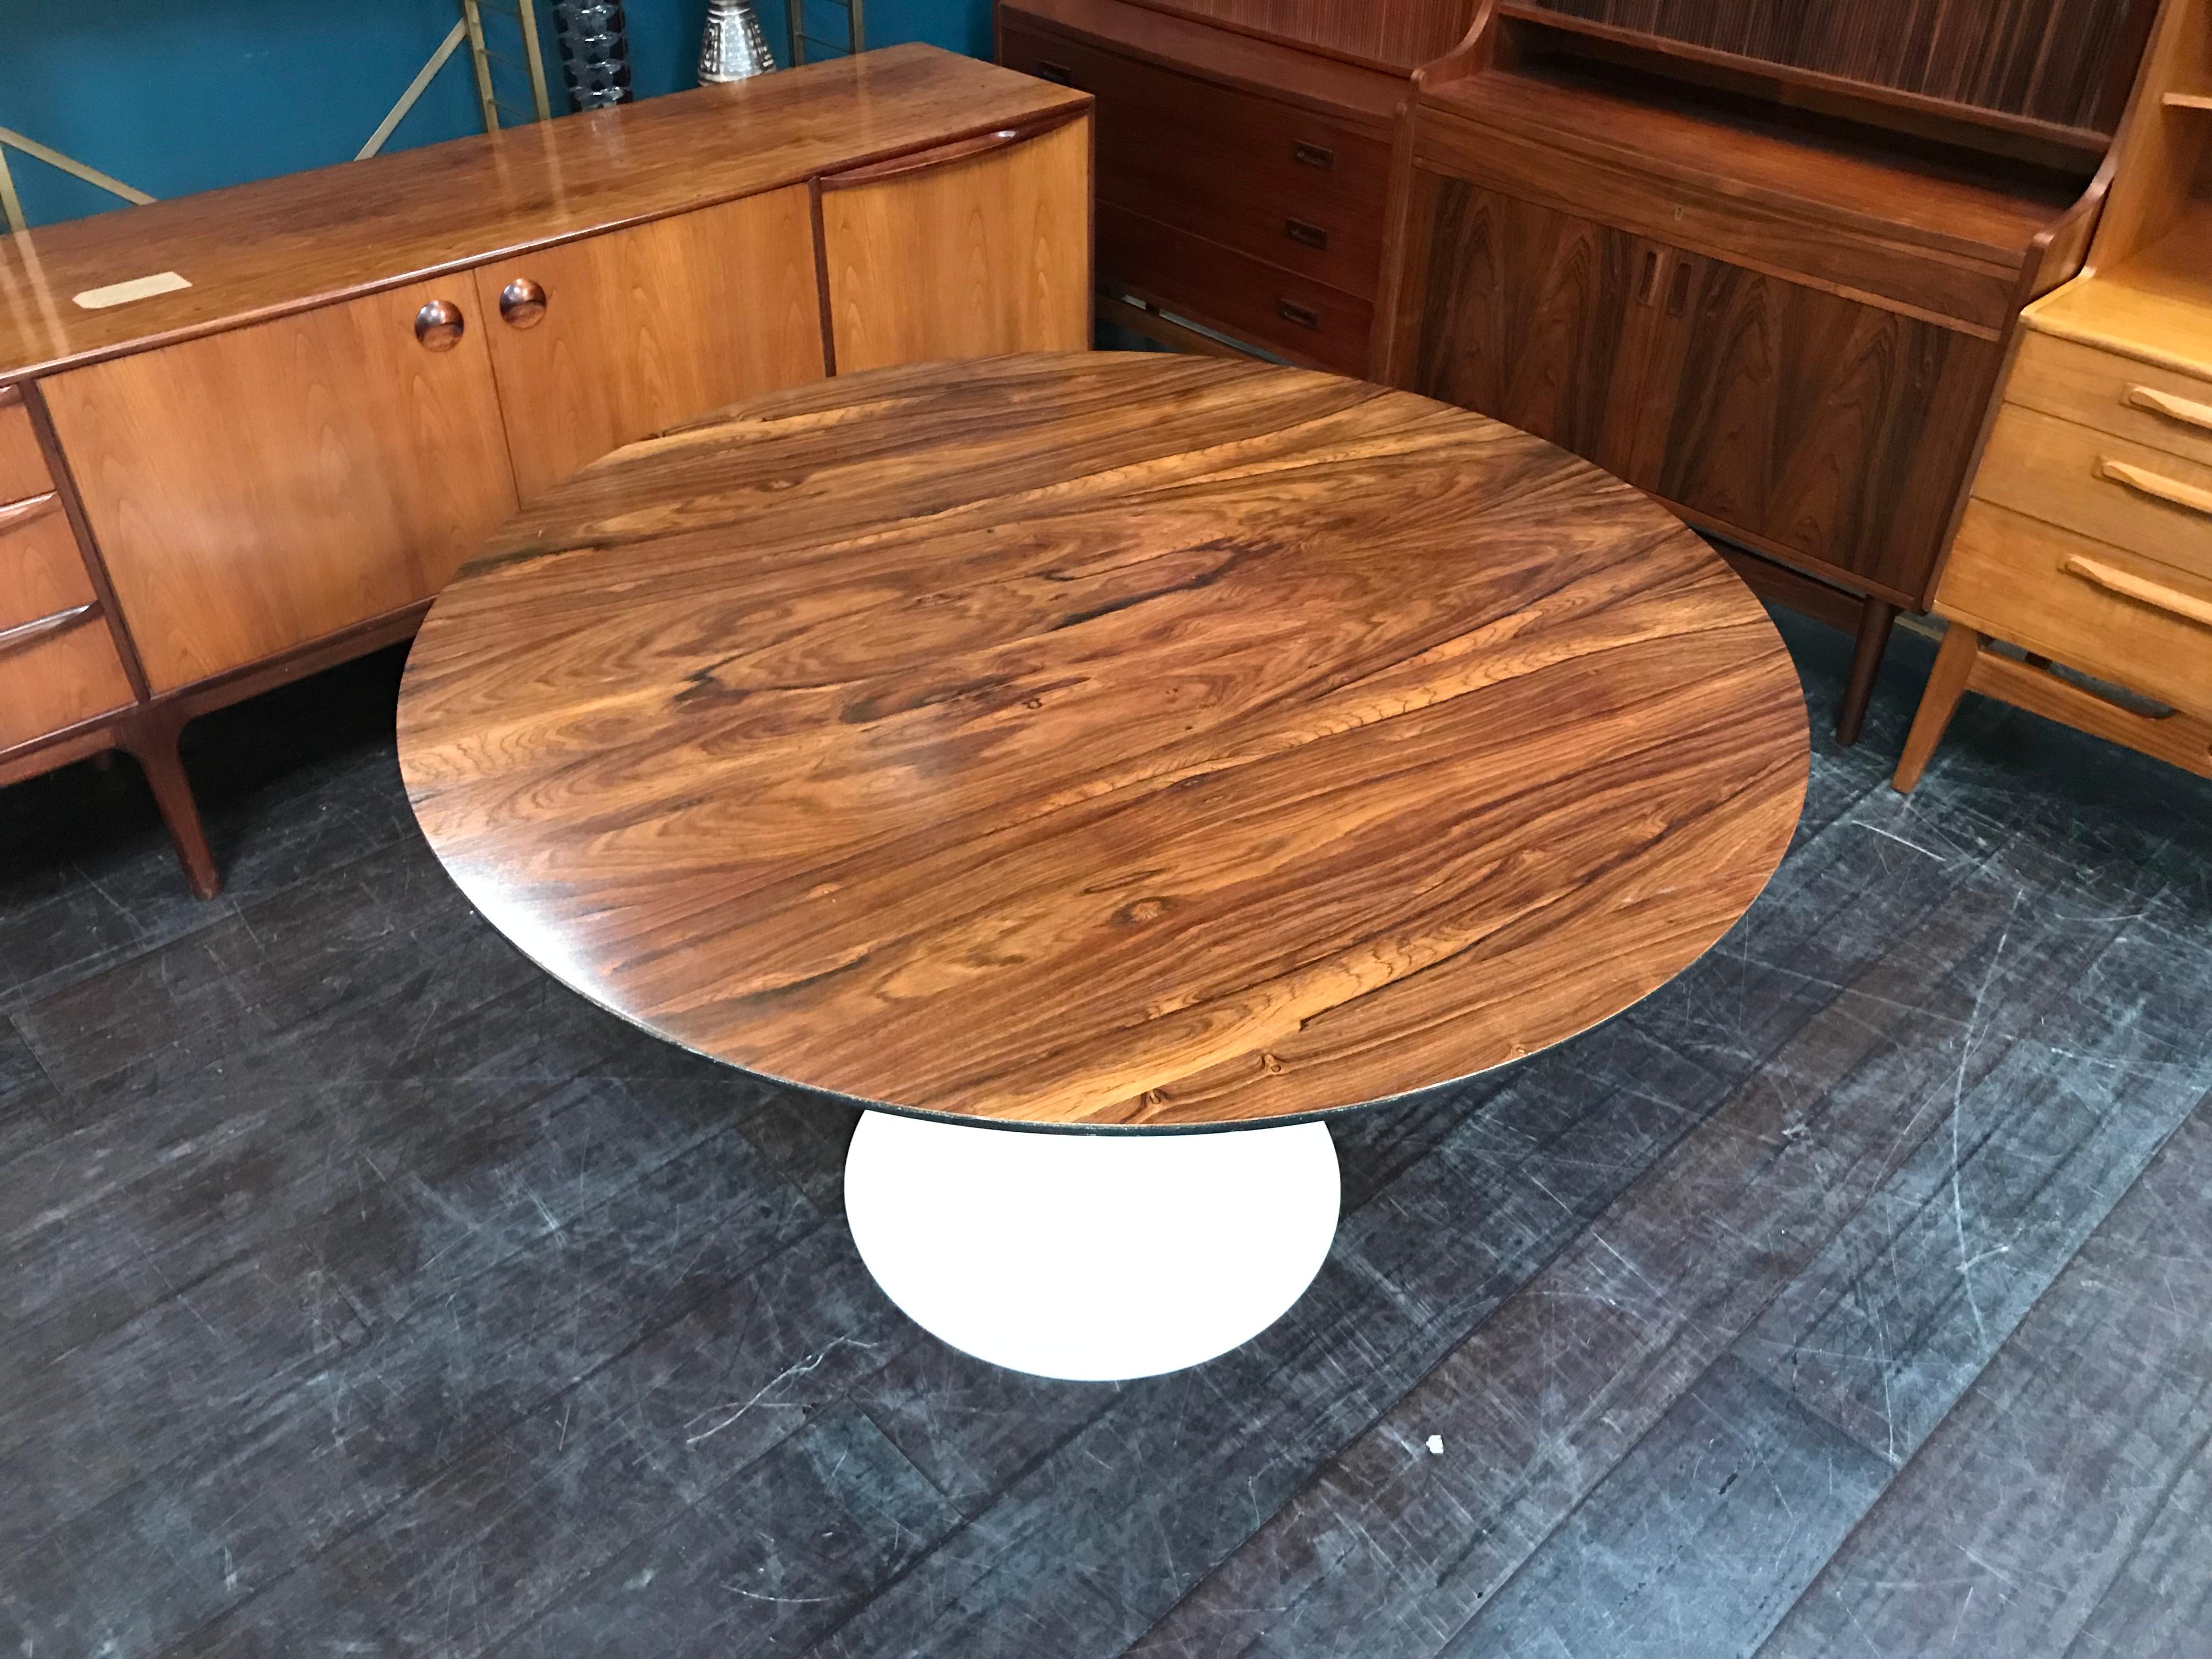 This is a super cool midcentury rosewood tulip table designed by Maurice Burke for Arkana in the 1960s. The grain on the table is absolutely stunning and the white ‘tulip’ base has been re-lacquered.

Arkana furniture seems to have been made